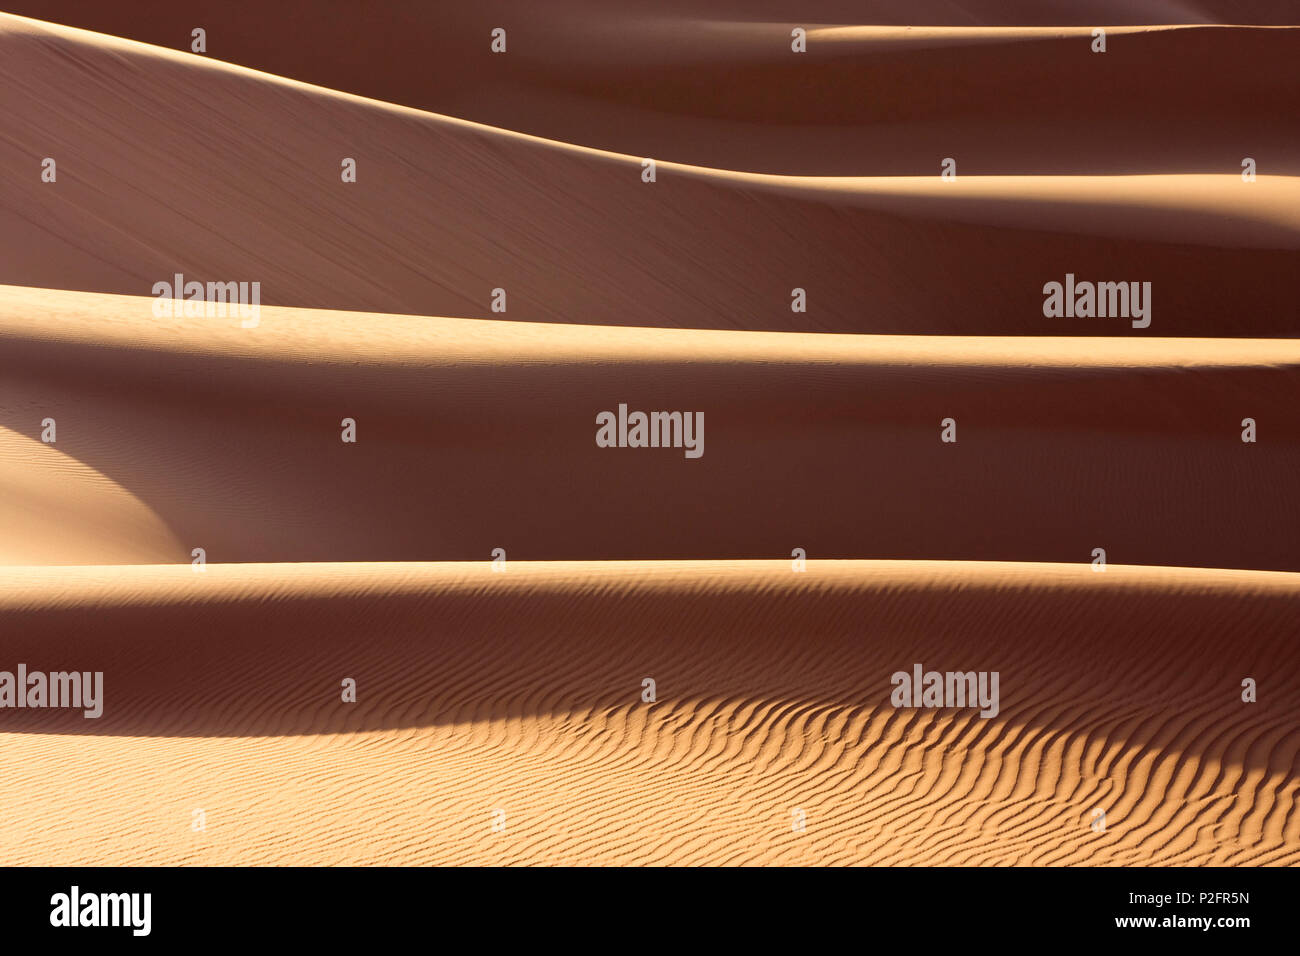 patterns, structures in the Sanddunes of the libyan desert, Sahara, Libya, North Africa Stock Photo